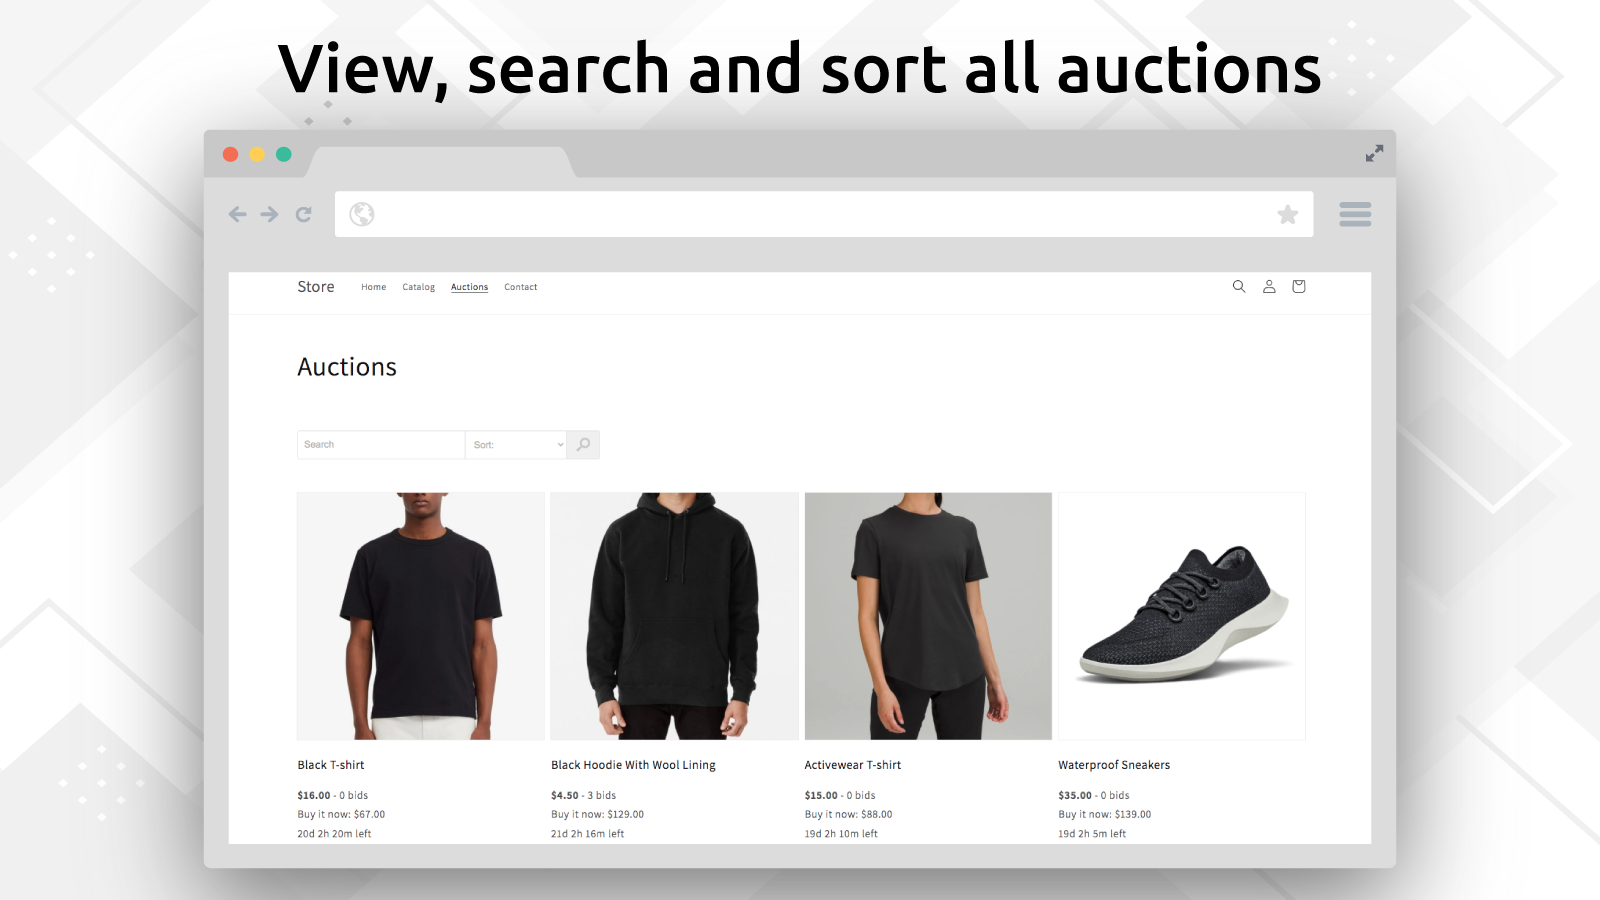 Screenshot view, search, sort all auctions